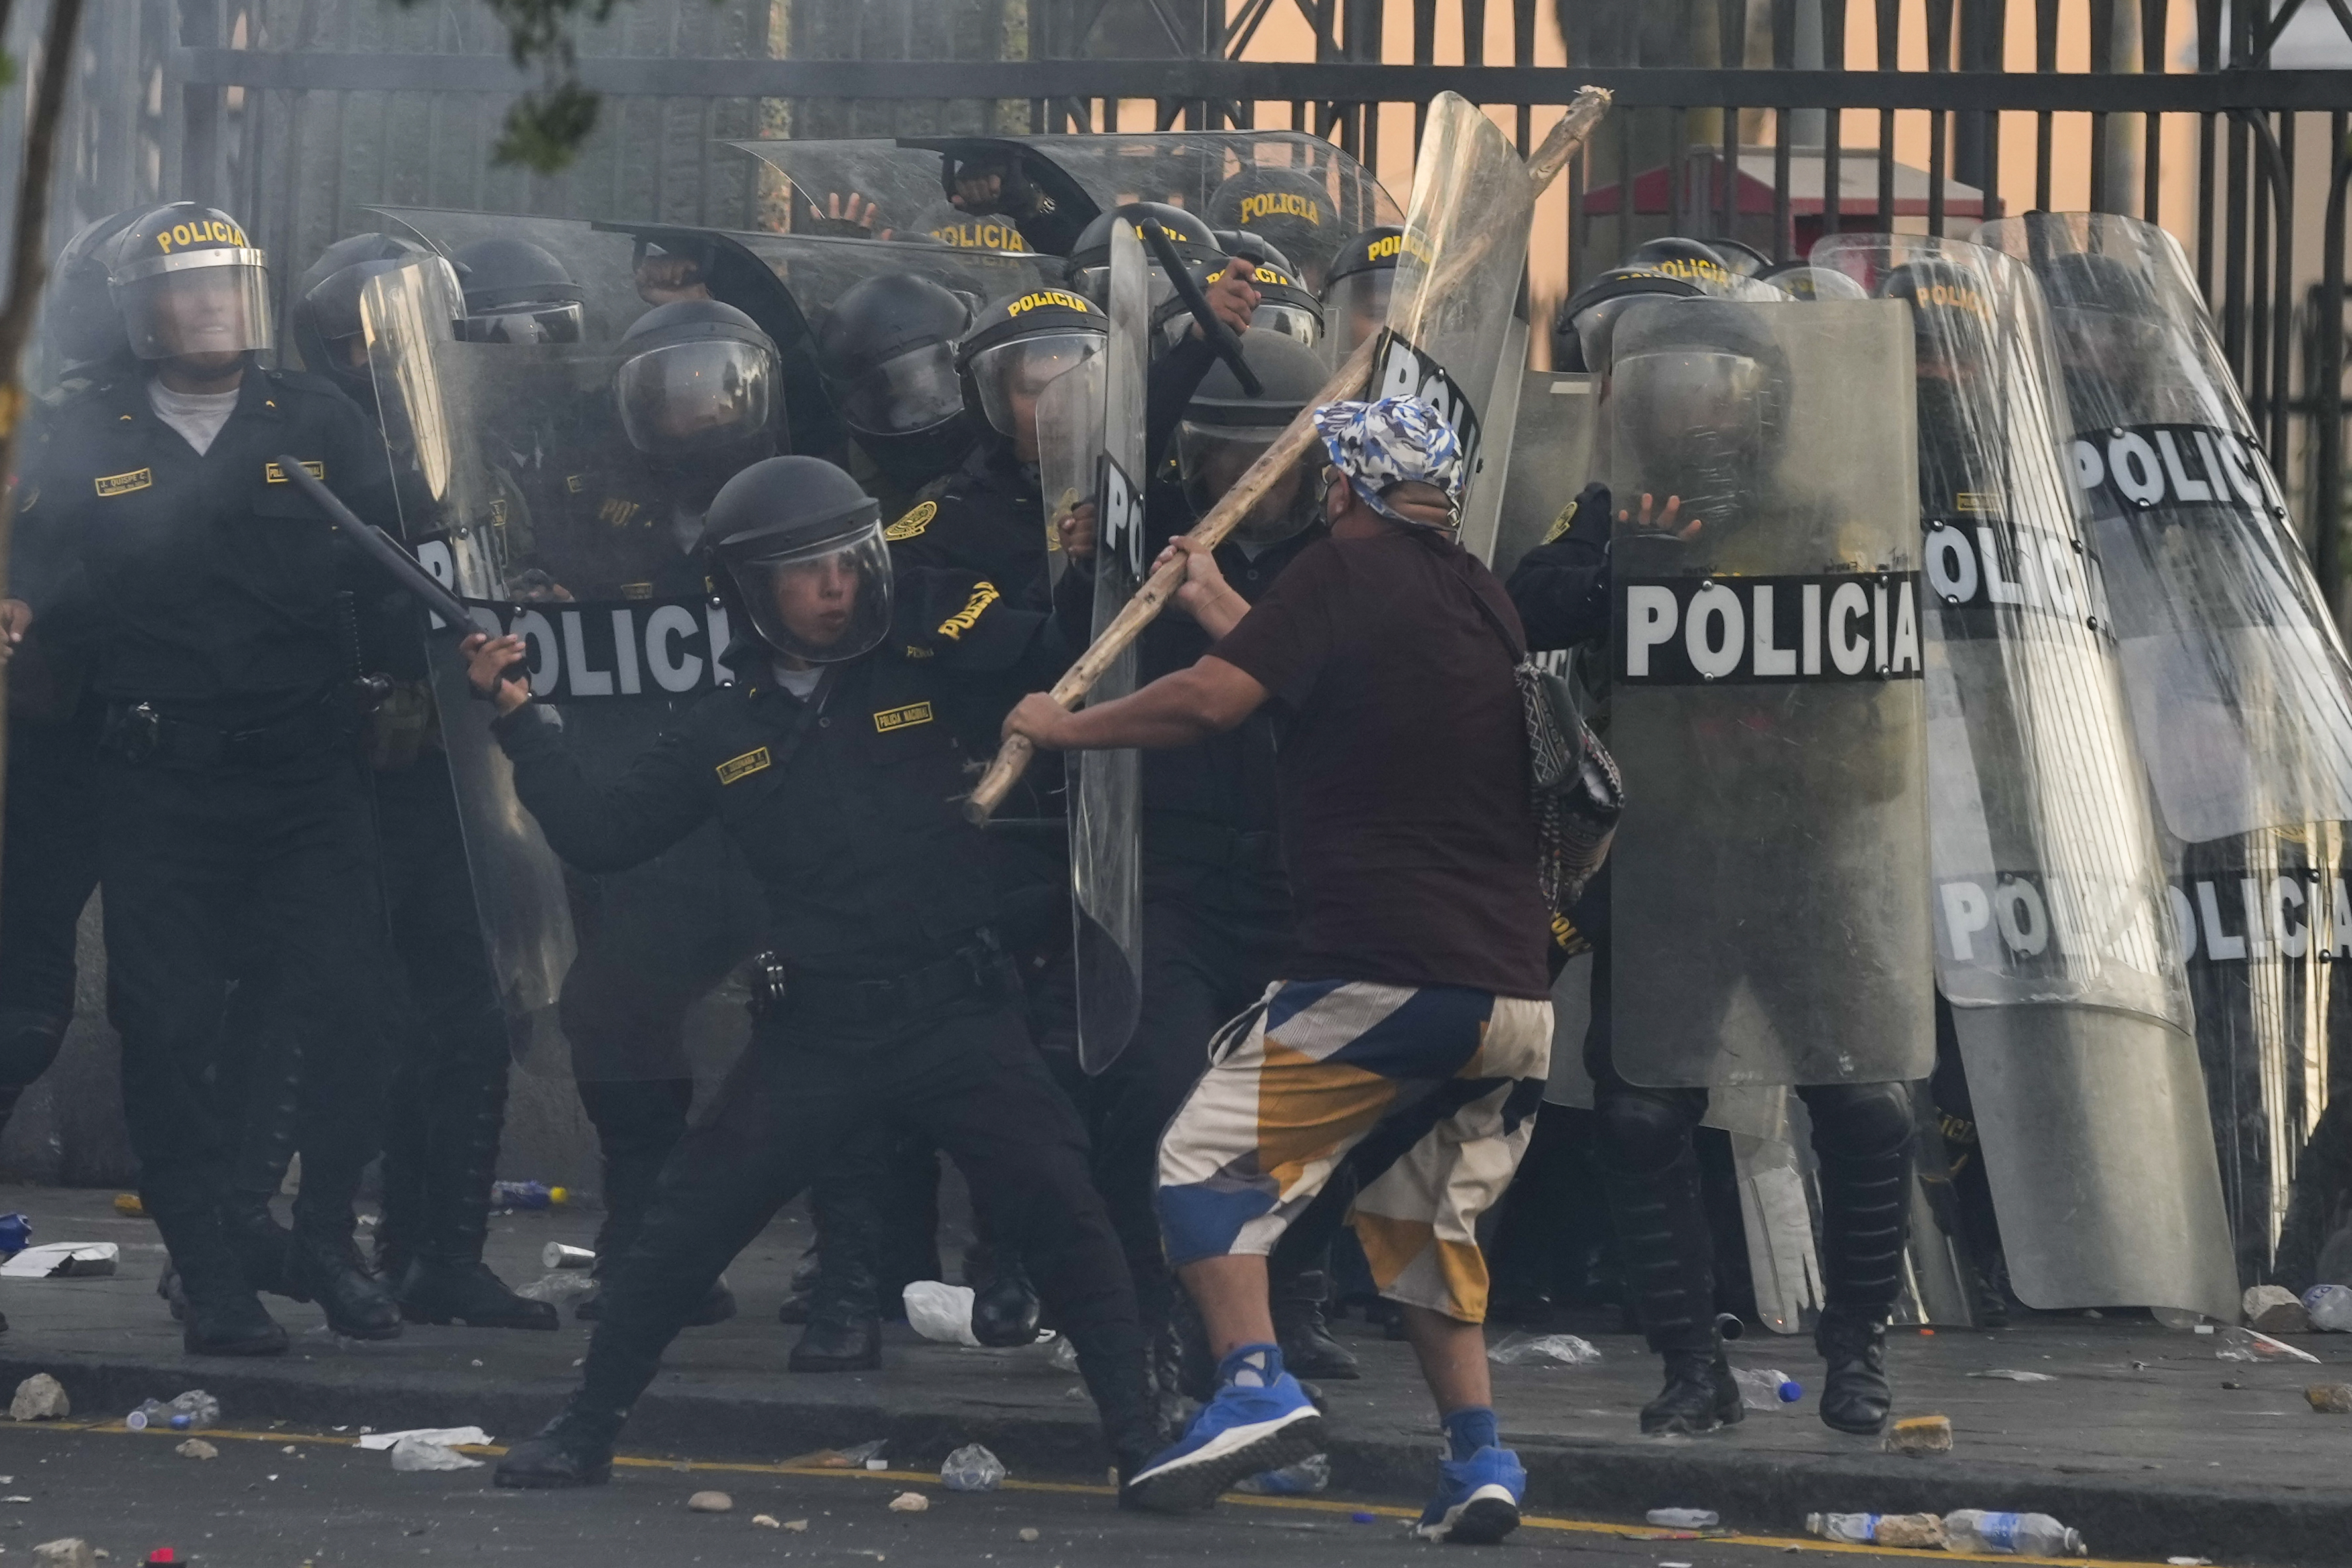 An anti-government protester charges police with a stick during clashes in Lima, Peru, Thursday, Jan. 19, 2023. The protests seek an immediate electoral advance, Boluarte's resignation, the release of ousted president Pedro Castillo, and justice for the at least 48 protesters killed in clashes with the police.  (AP Photo/Martín Mejía)